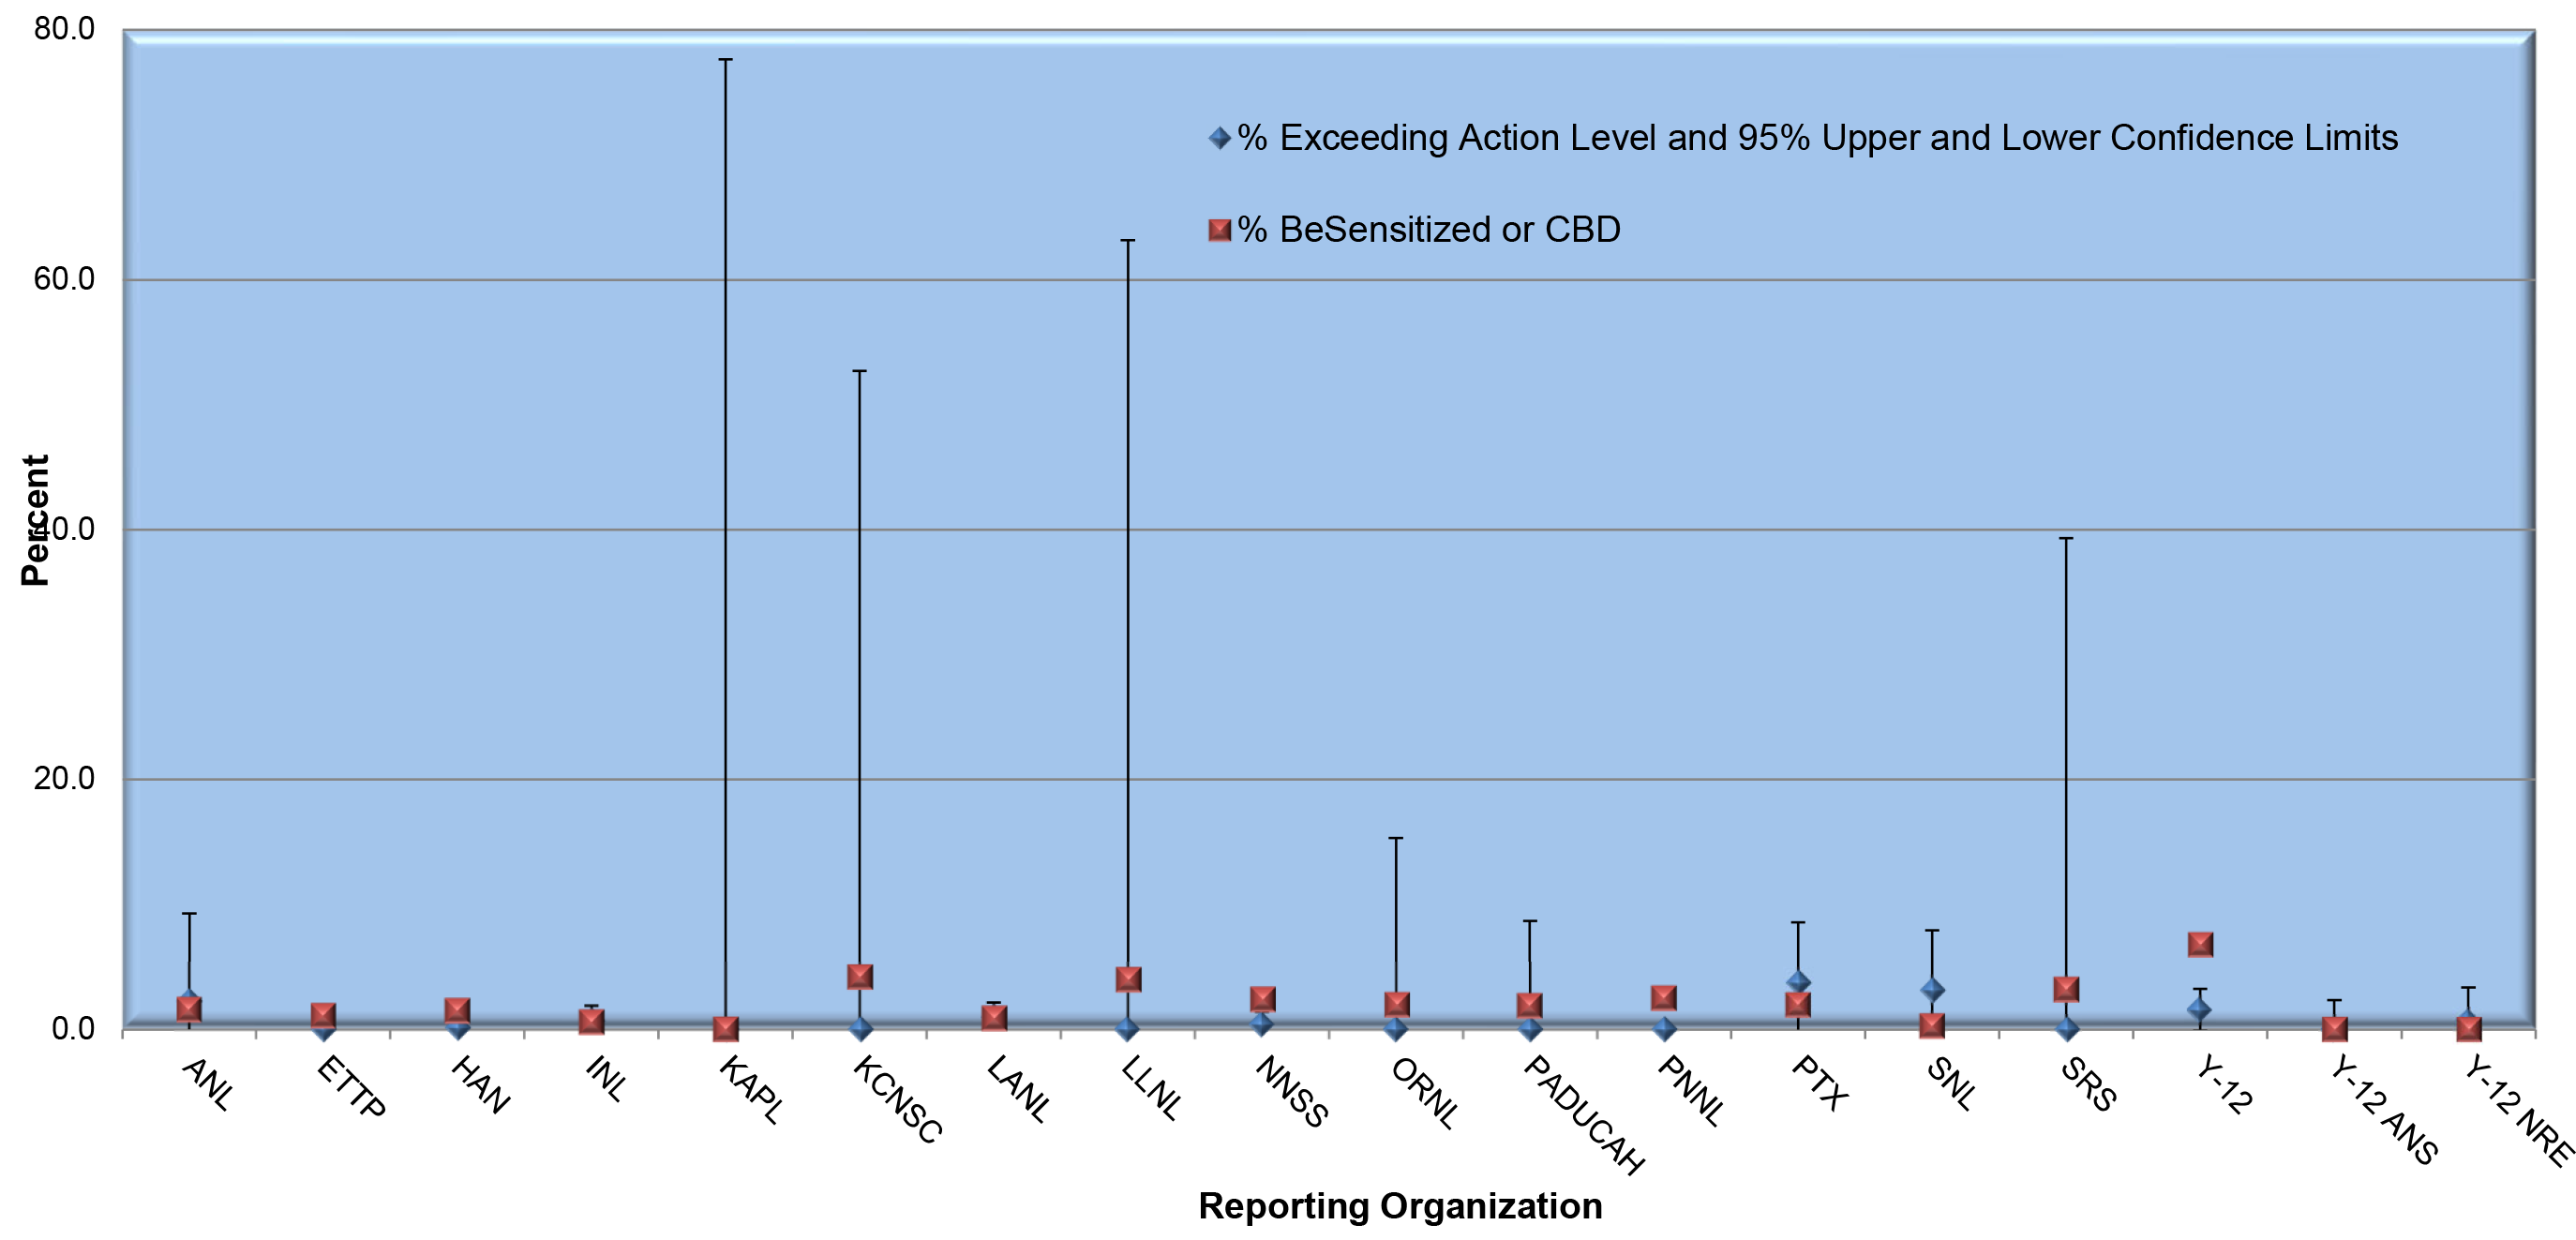 Comparison of the Percent of Workers Diagnosed with BeS or CBD with Percent Exceeding Action Level 0.2 μg/m3 by Reporting Organization (2002-2020) infographic